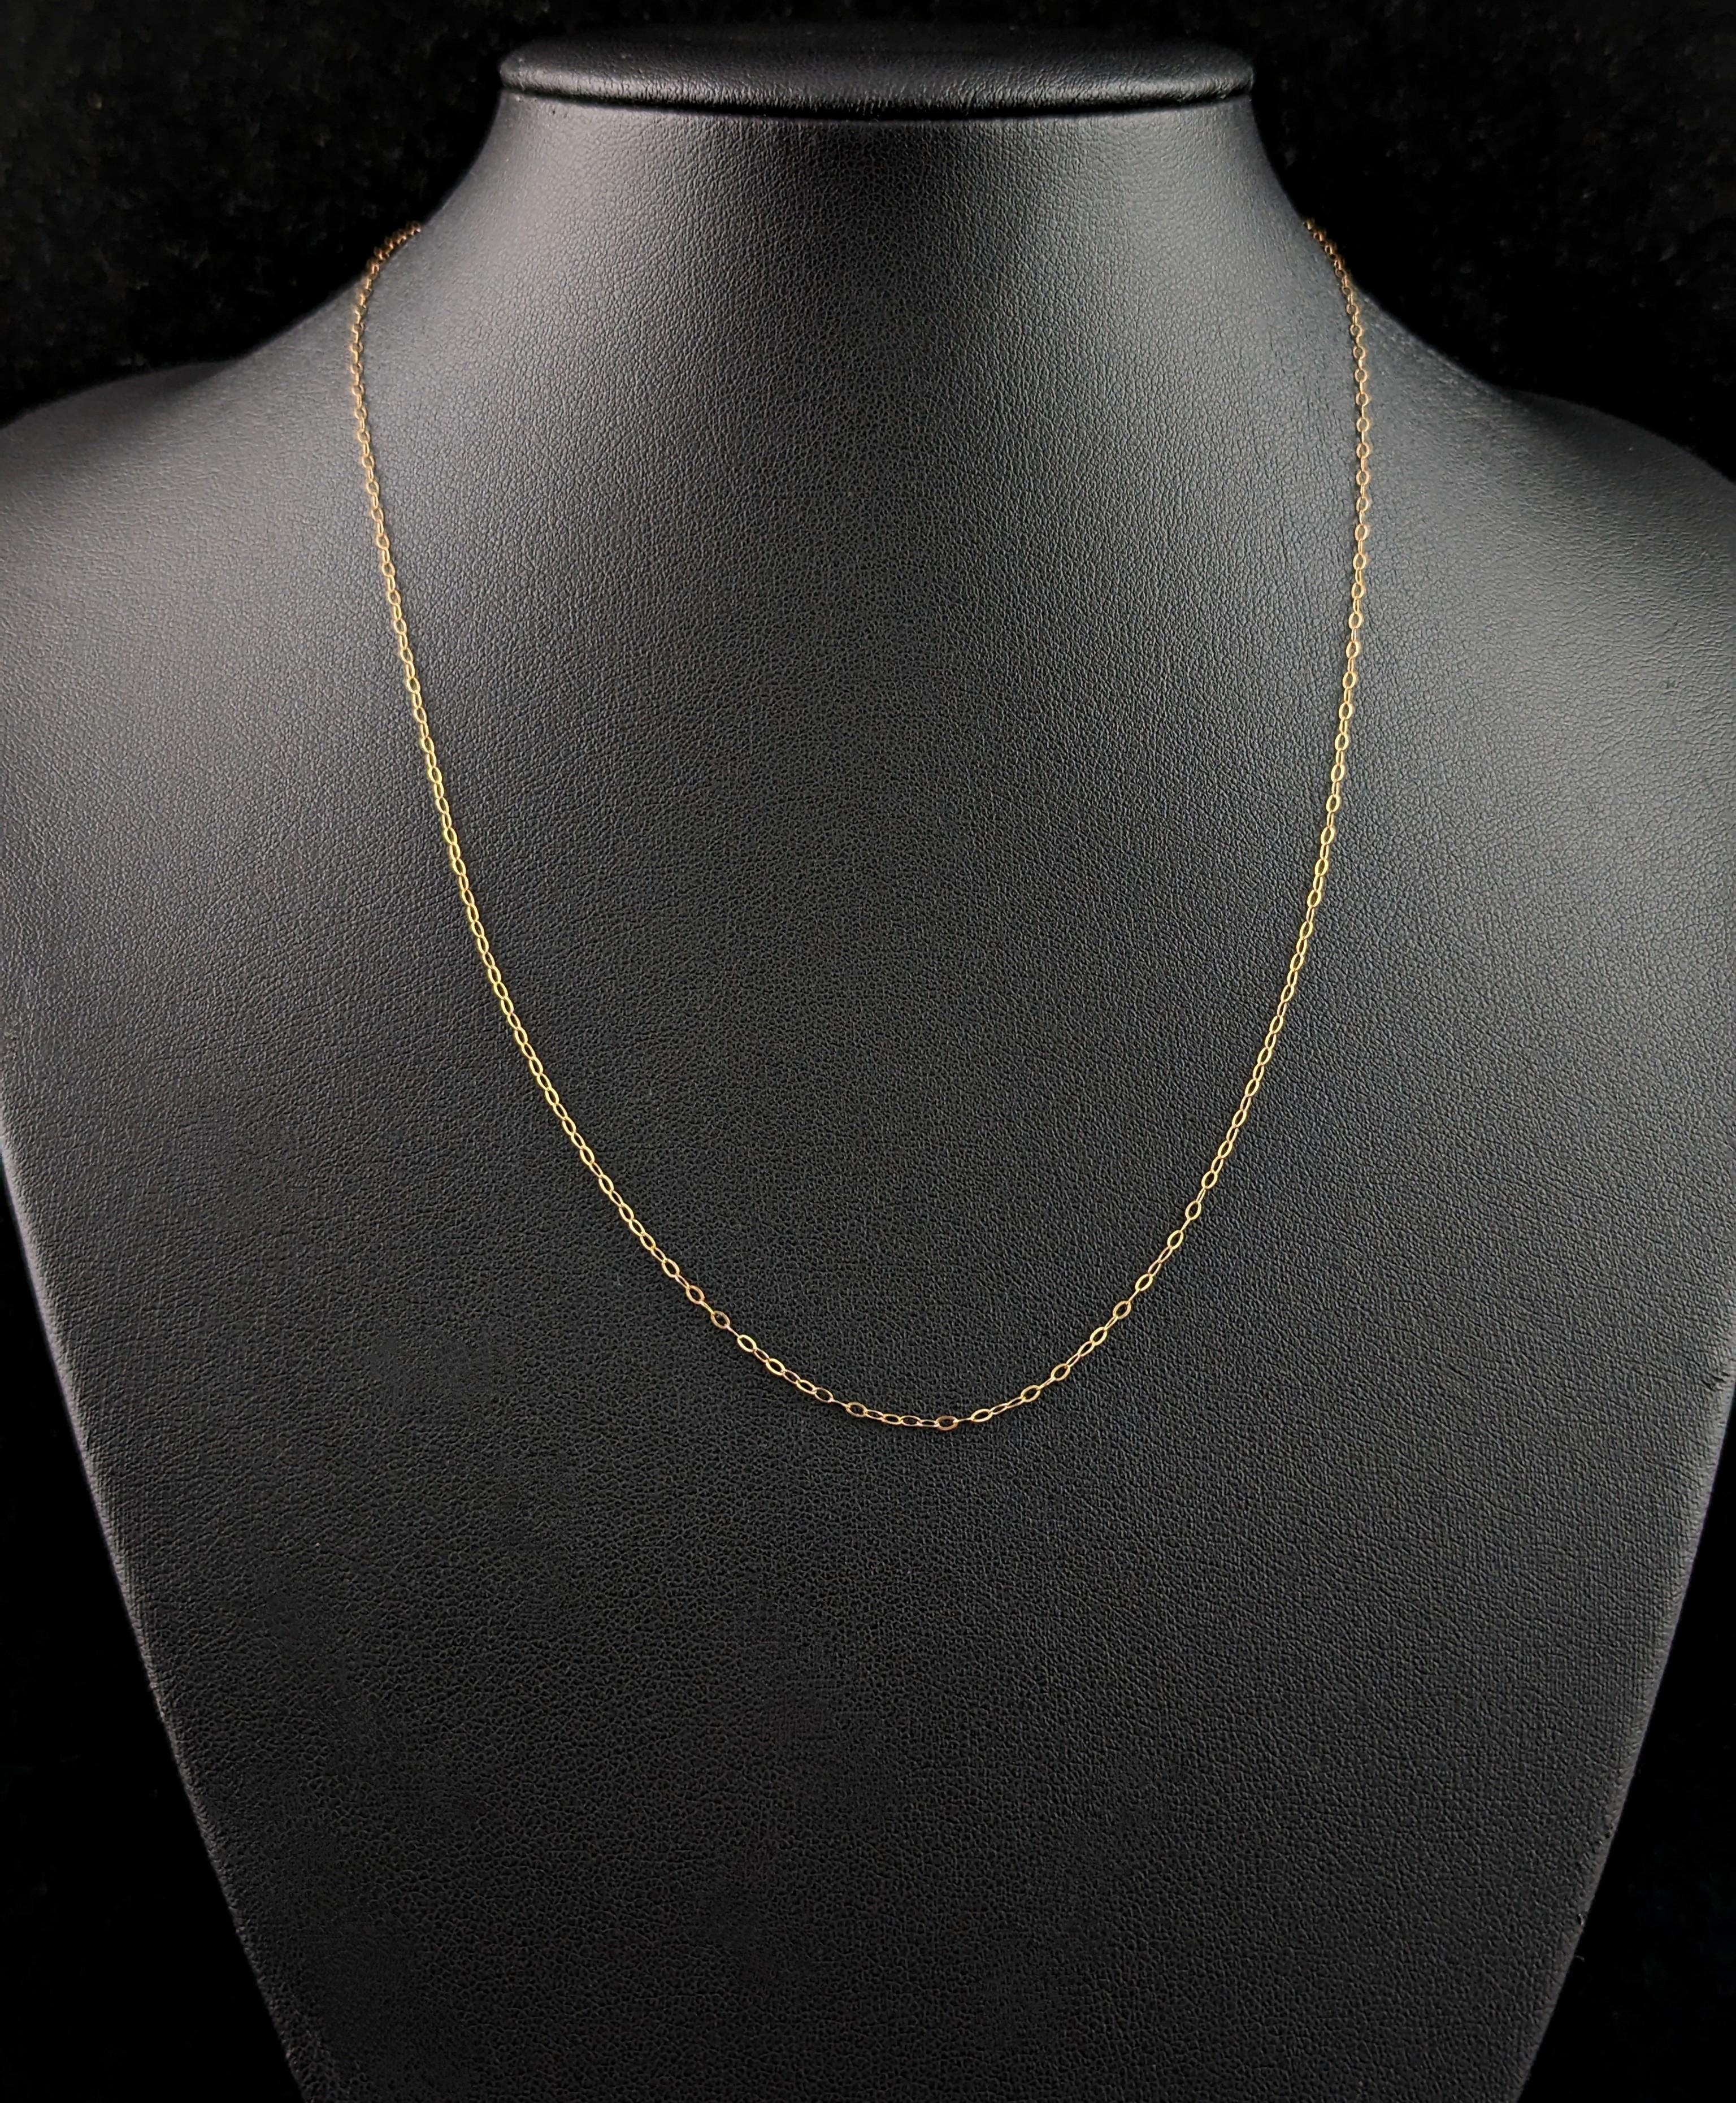 A fine dainty vintage 9ct gold trace chain such as this is the perfect accompaniment to your favourite small lockets, pendants and charms.

It is a fine rolo trace link in a rich yellow gold with a spring ring clasp.

It is a good length and will